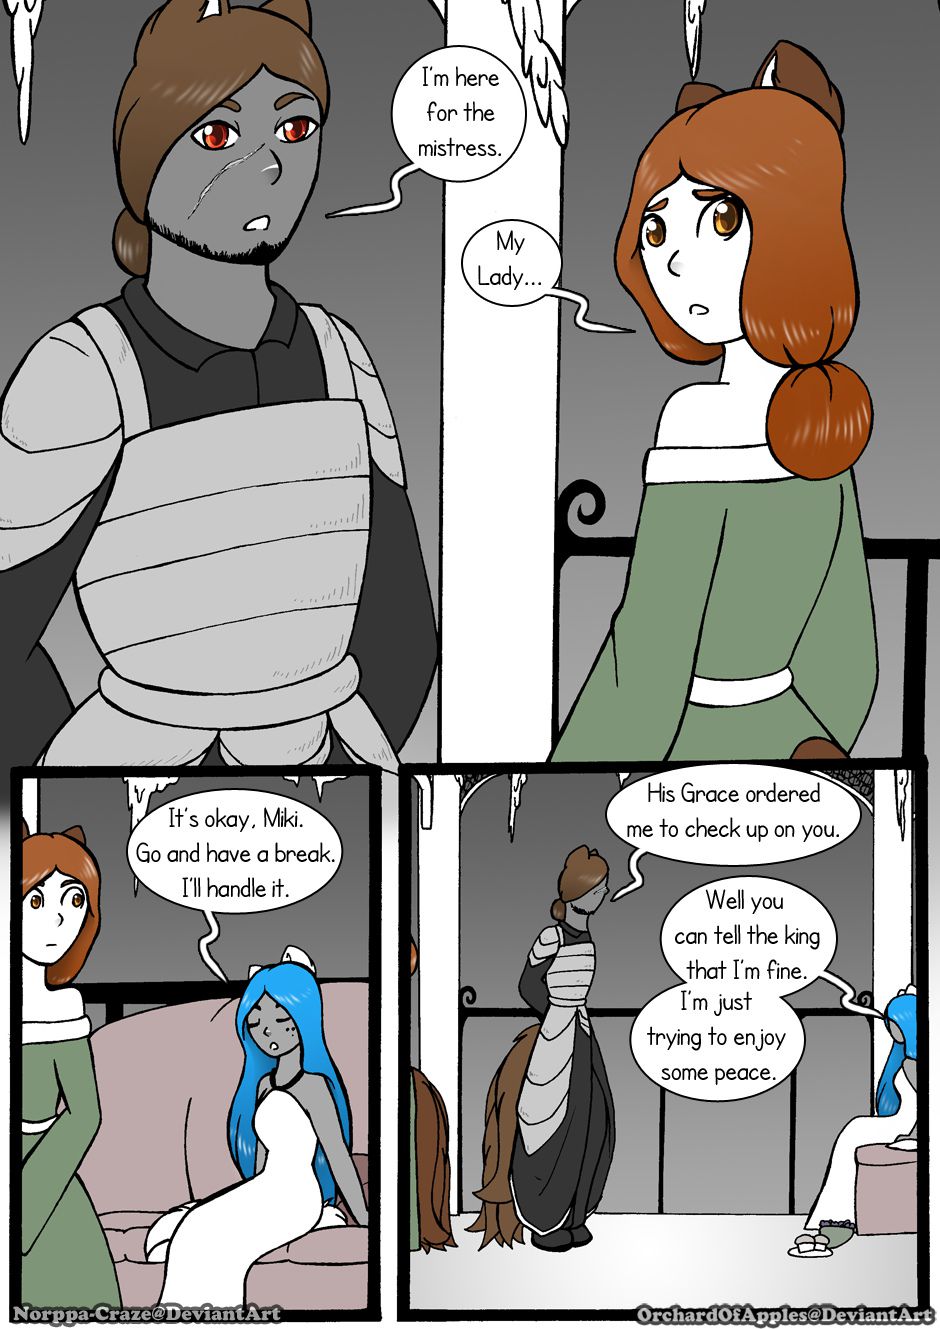 [Jeny-jen94] Between Kings and Queens [Ongoing] 248